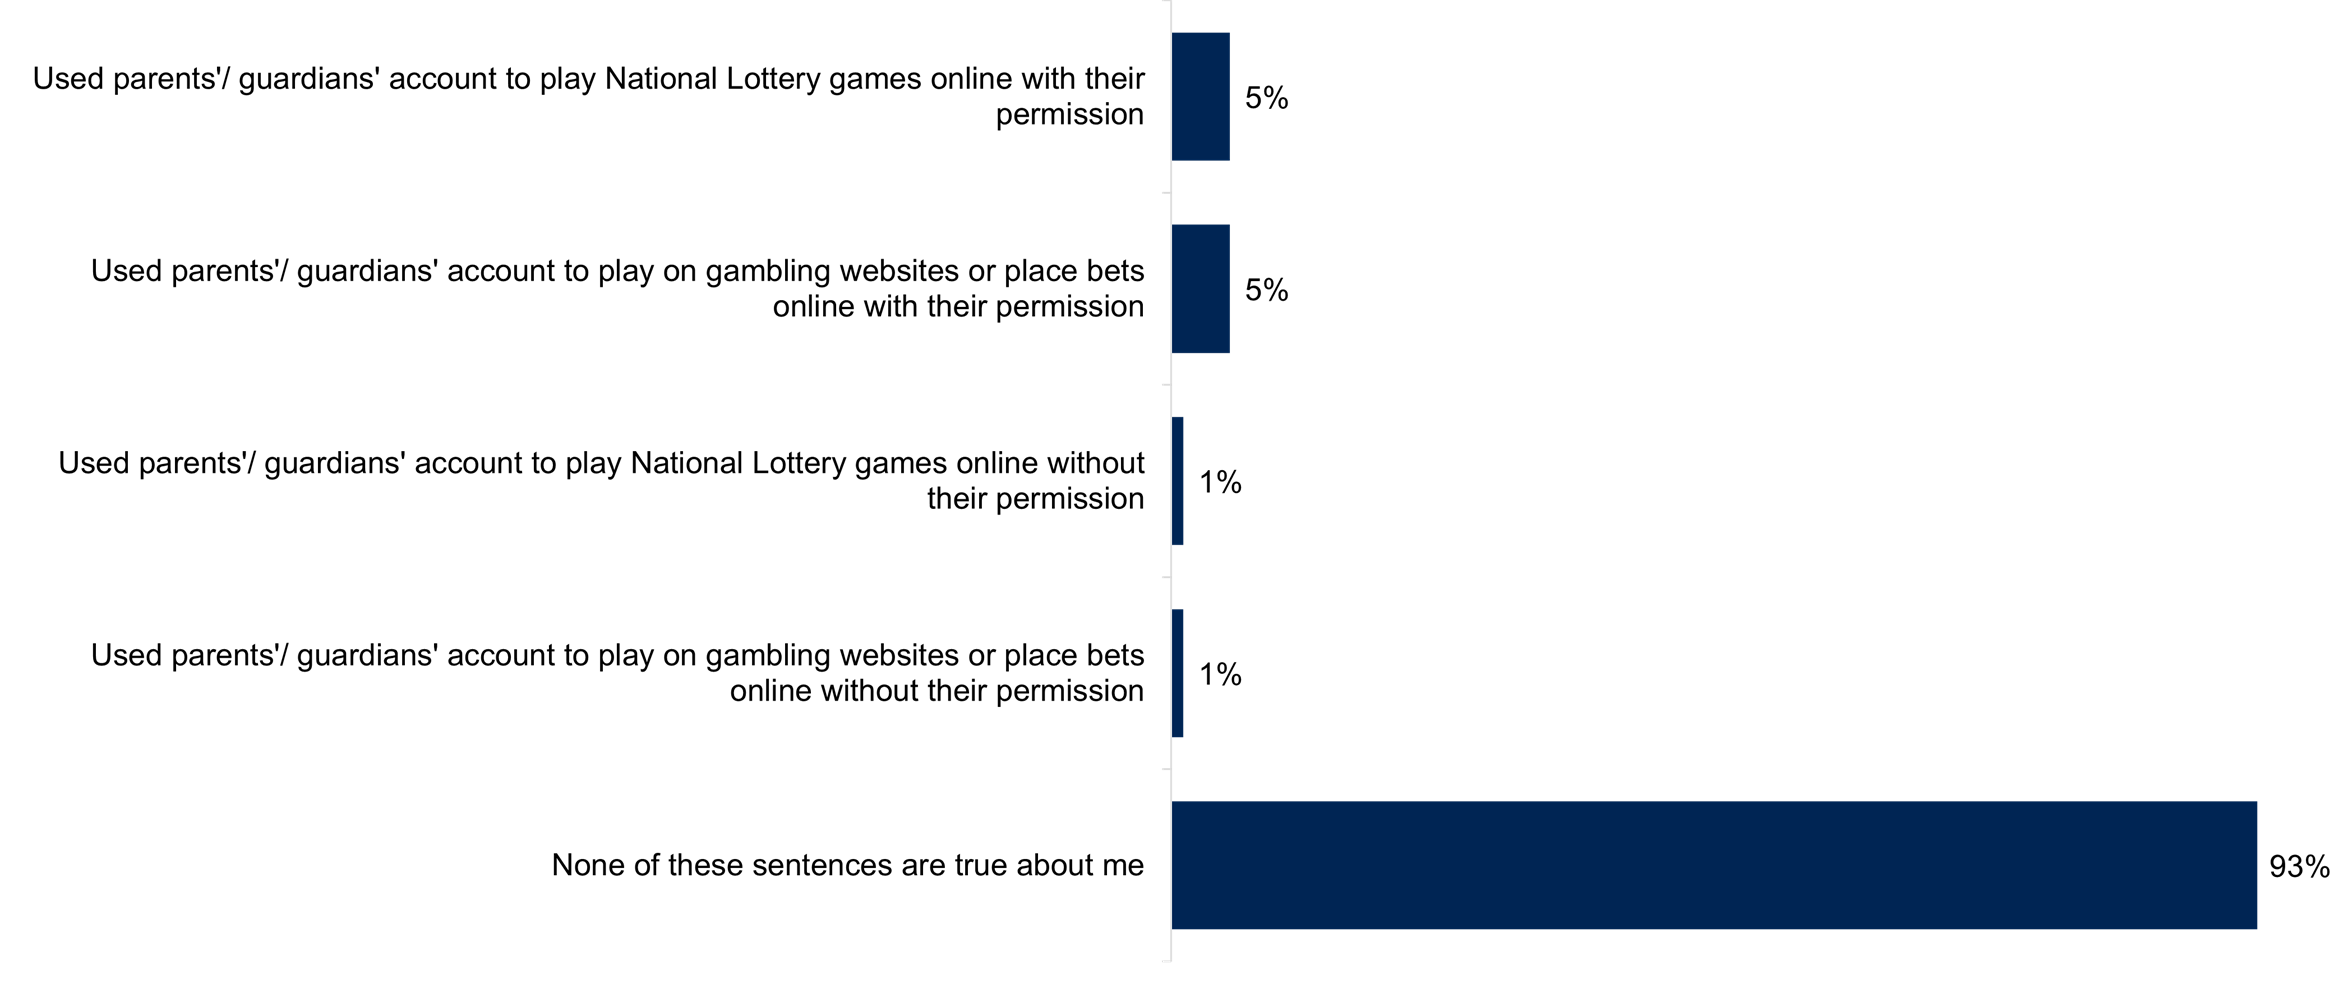 A bar chart showing whether young people gambled online with their parent's or guardian's account with their parent's or guardian's permission, from 'None of these sentences are true about me' to 'Used parent's and/or guardian's account to play National Lottery games online with their permission', in the last 12 months. Data from the chart is provided within the following table.